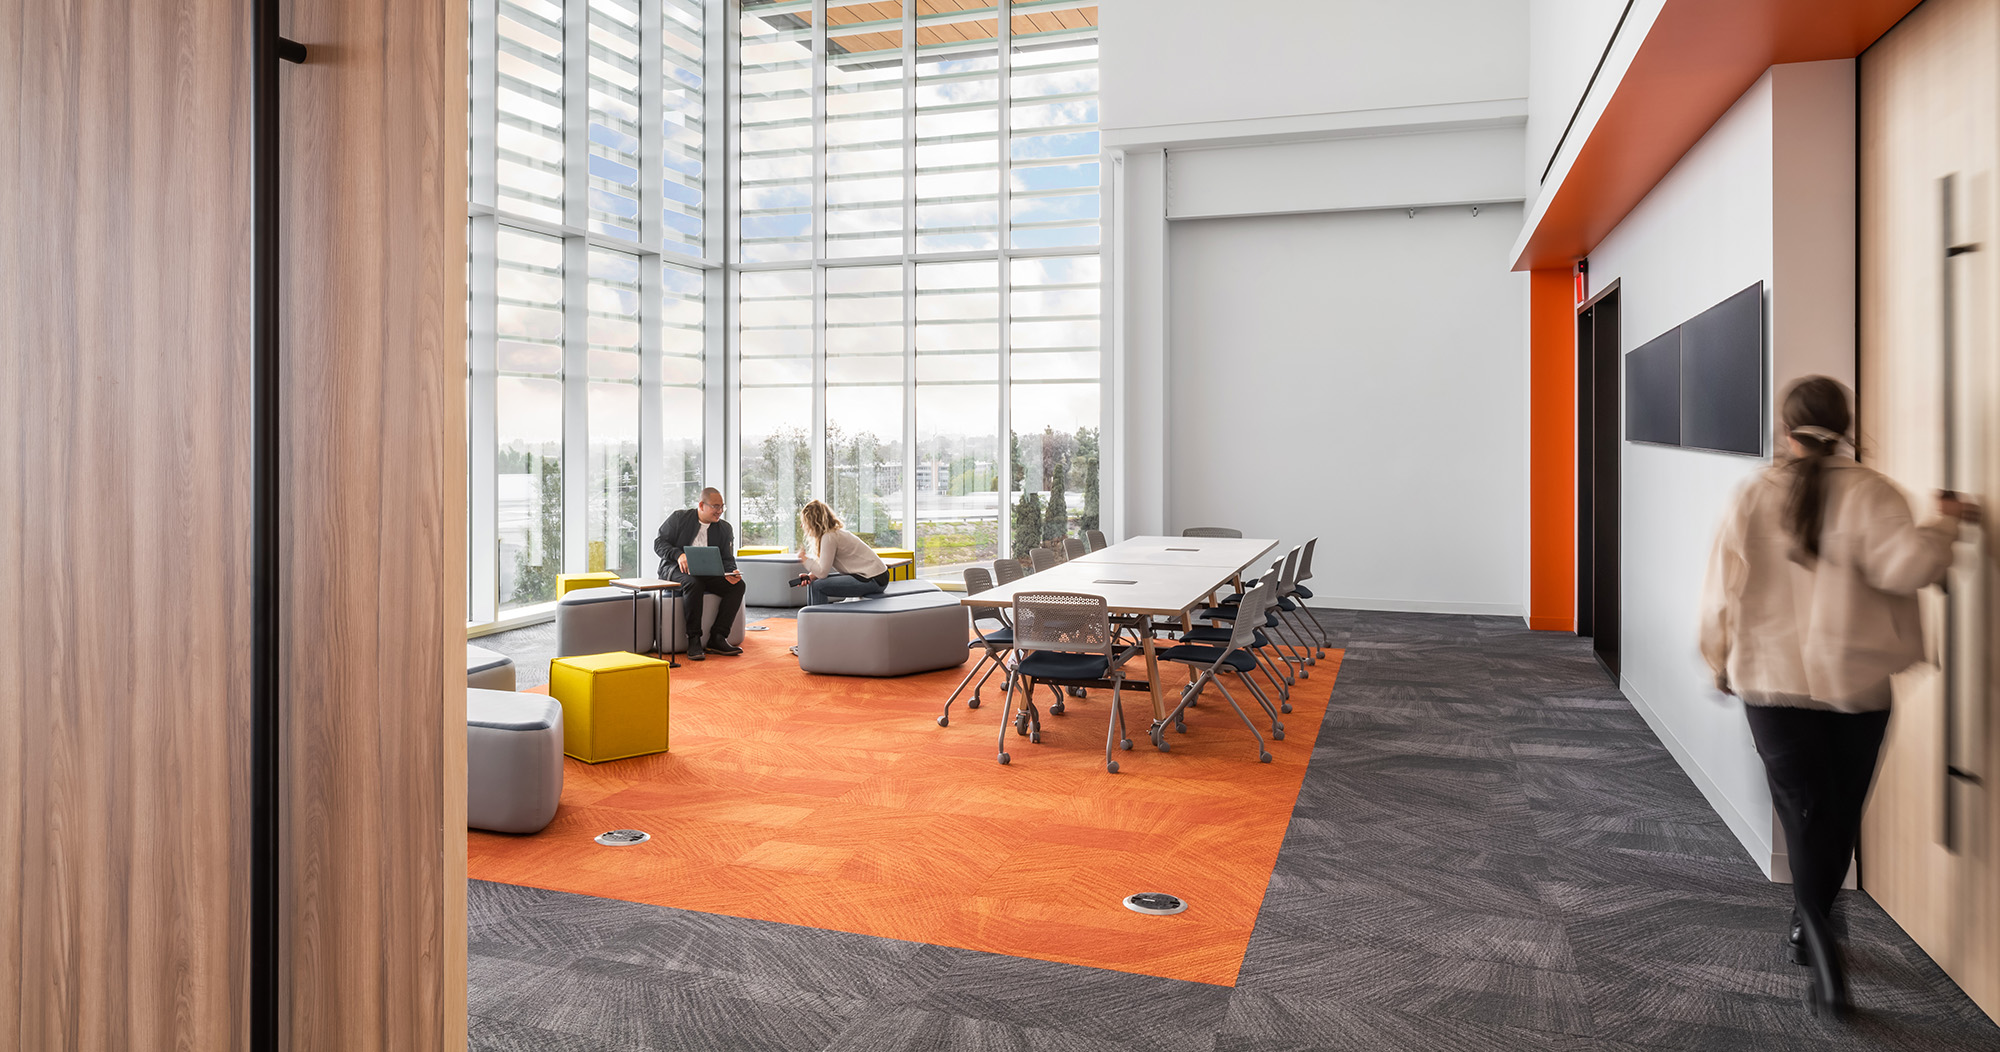 New Laserfiche Global Headquarters Welcomes Employees with an Iconic Modern Workplace 